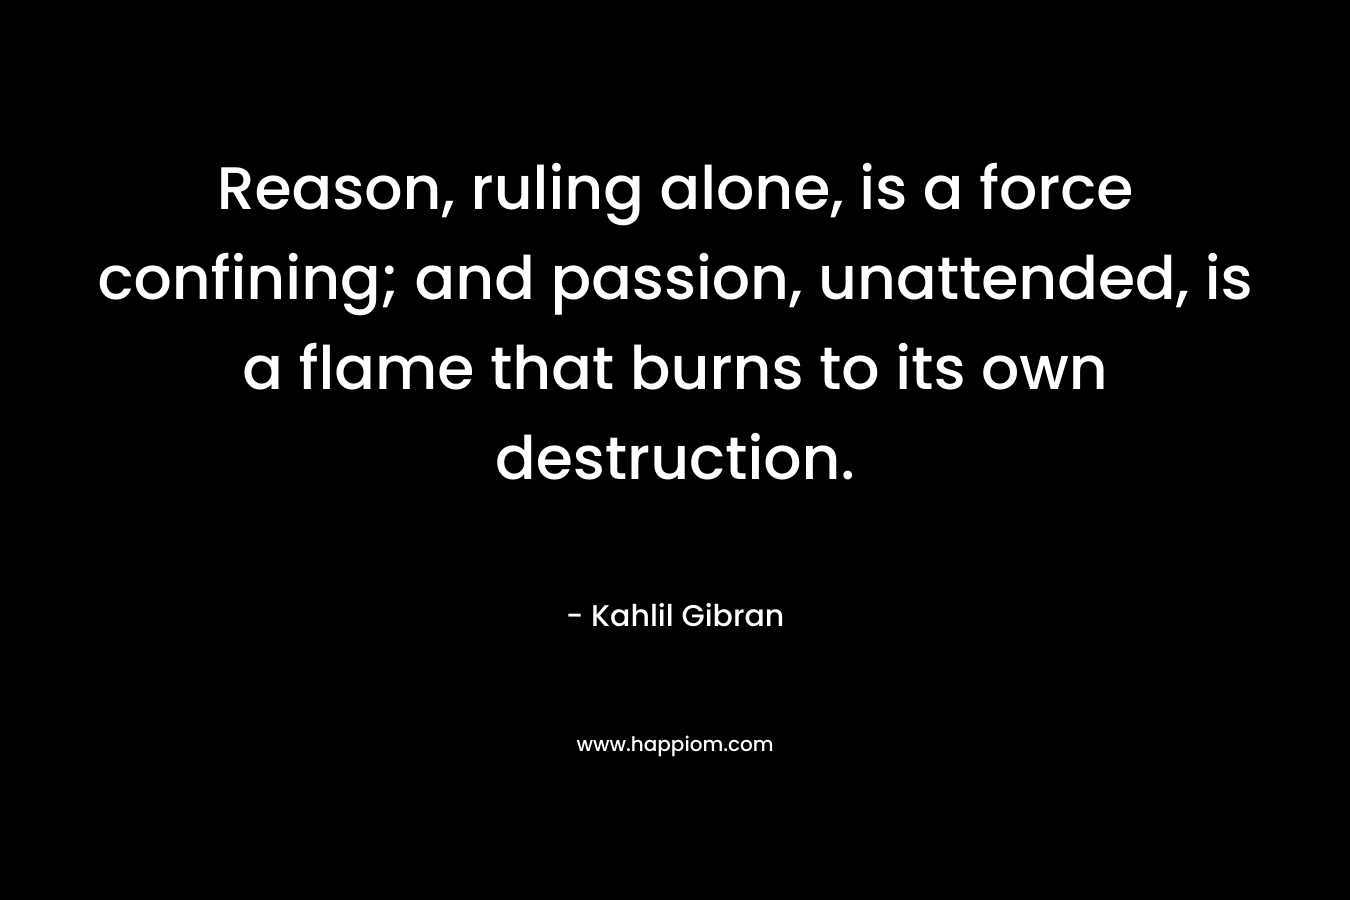 Reason, ruling alone, is a force confining; and passion, unattended, is a flame that burns to its own destruction. – Kahlil Gibran